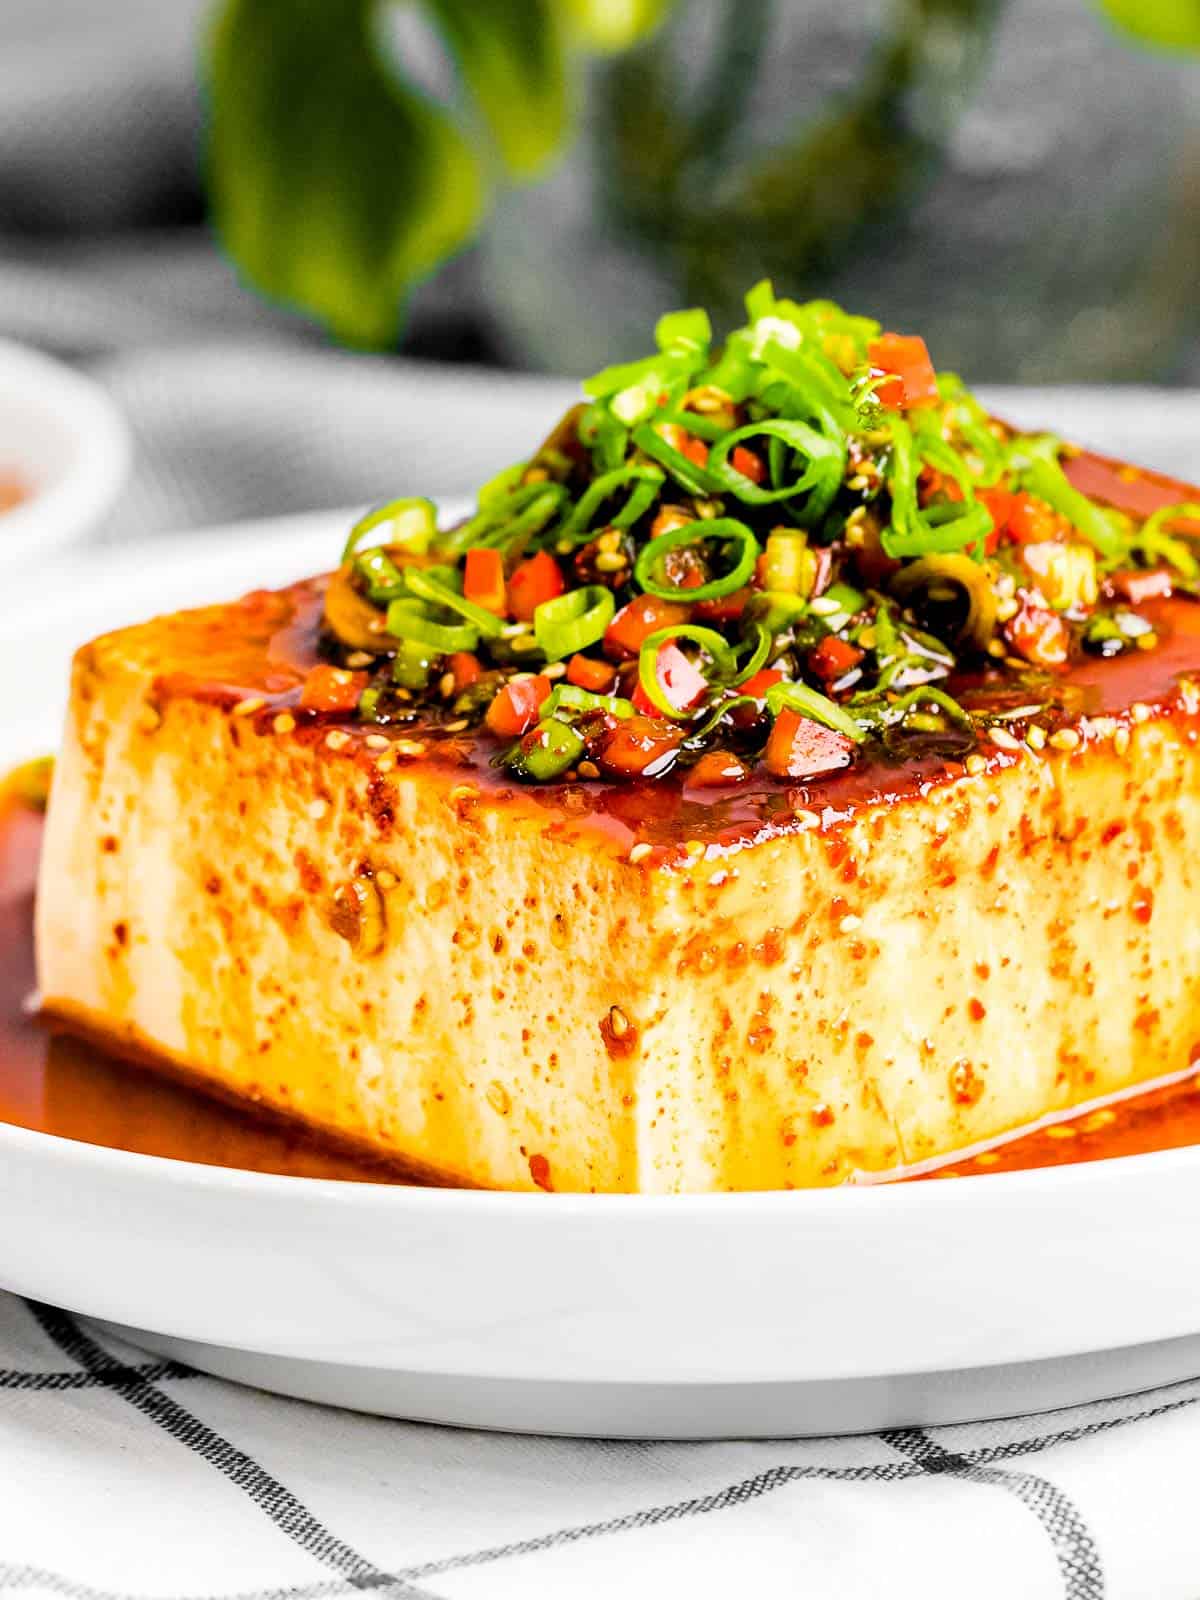 Korean silken tofu with vegan soy sauce with green onions, and red pepper flakes in a white bowl.